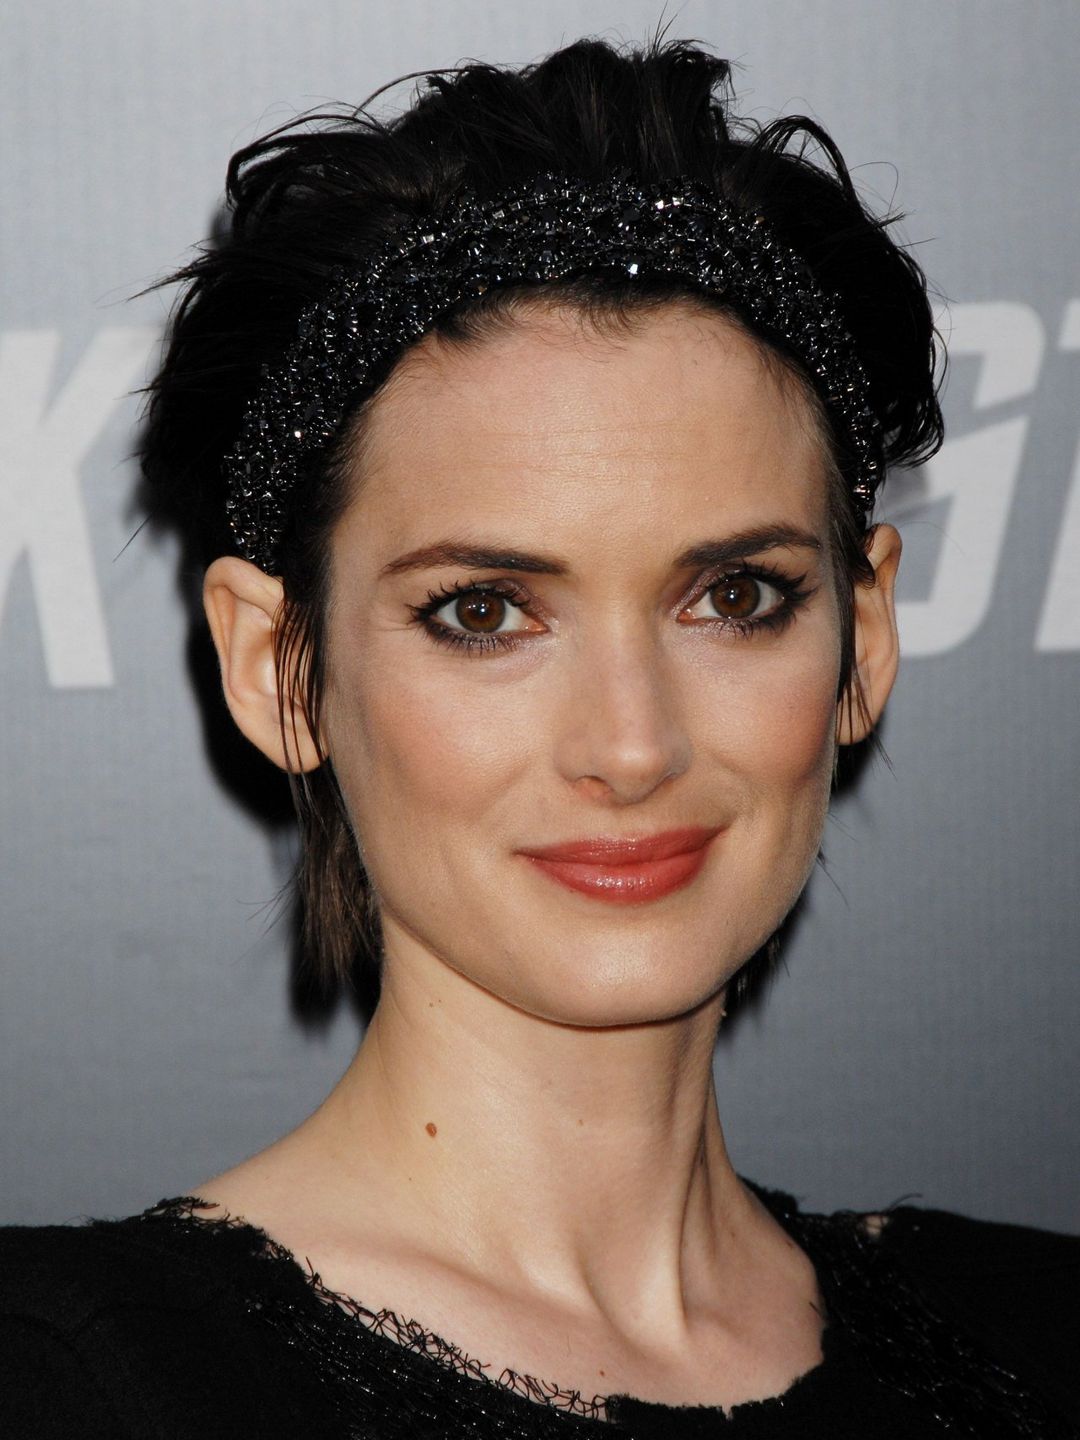 Winona Ryder young age